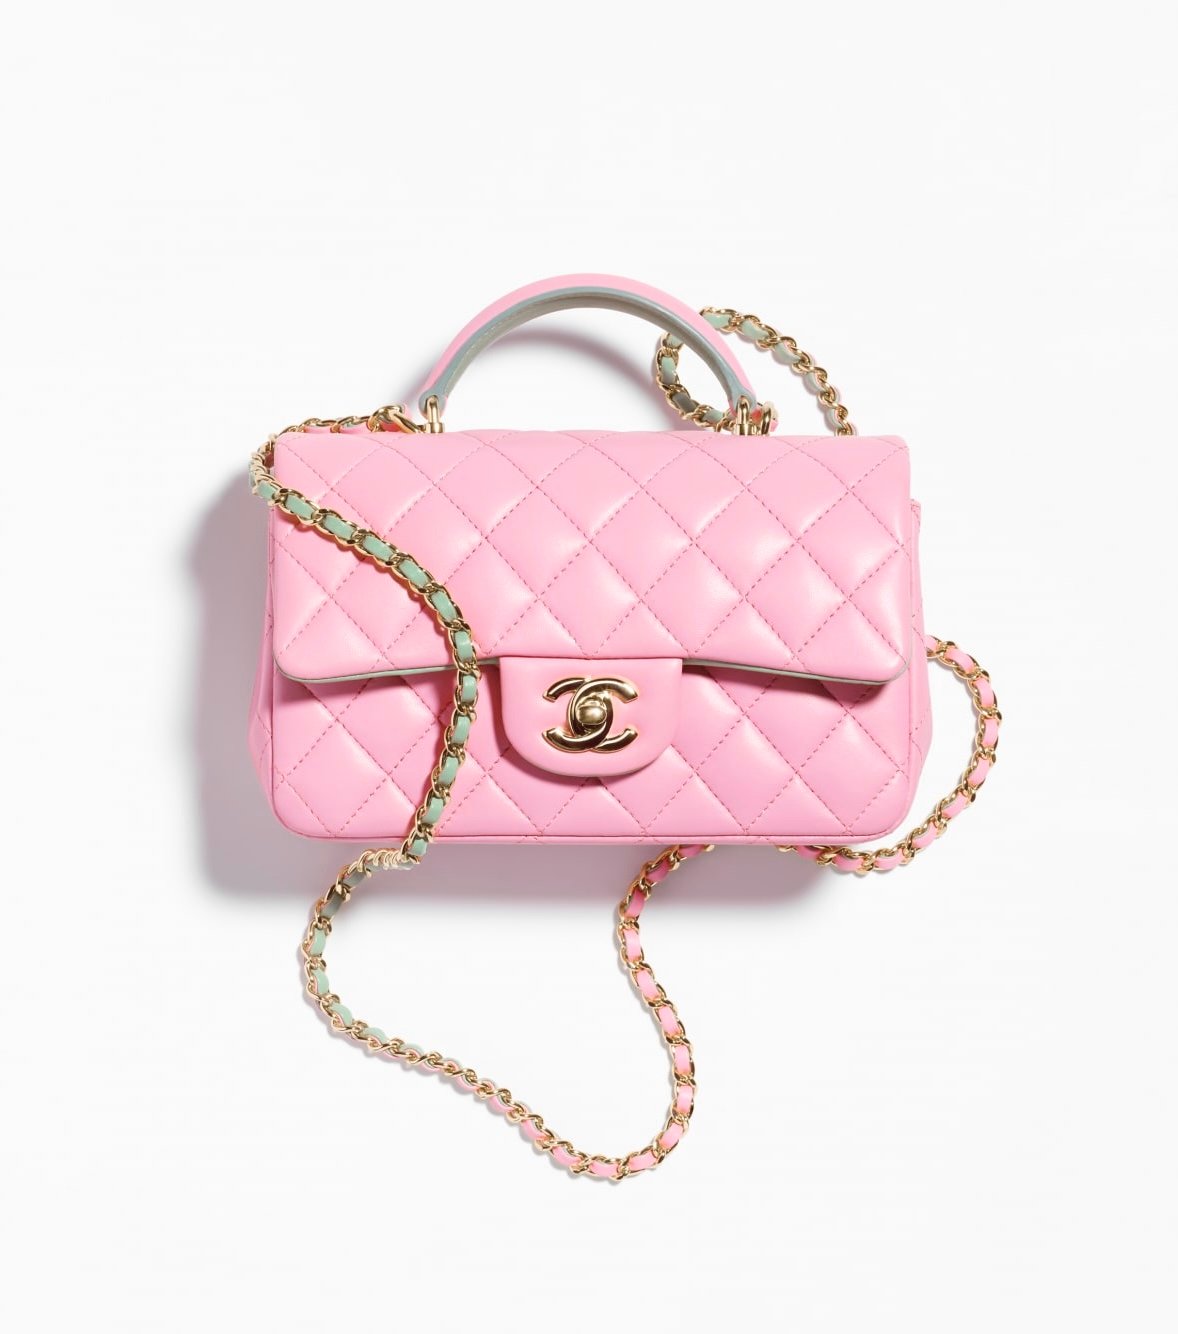 First Look Chanels Spring 2022 Bags  PurseBlog